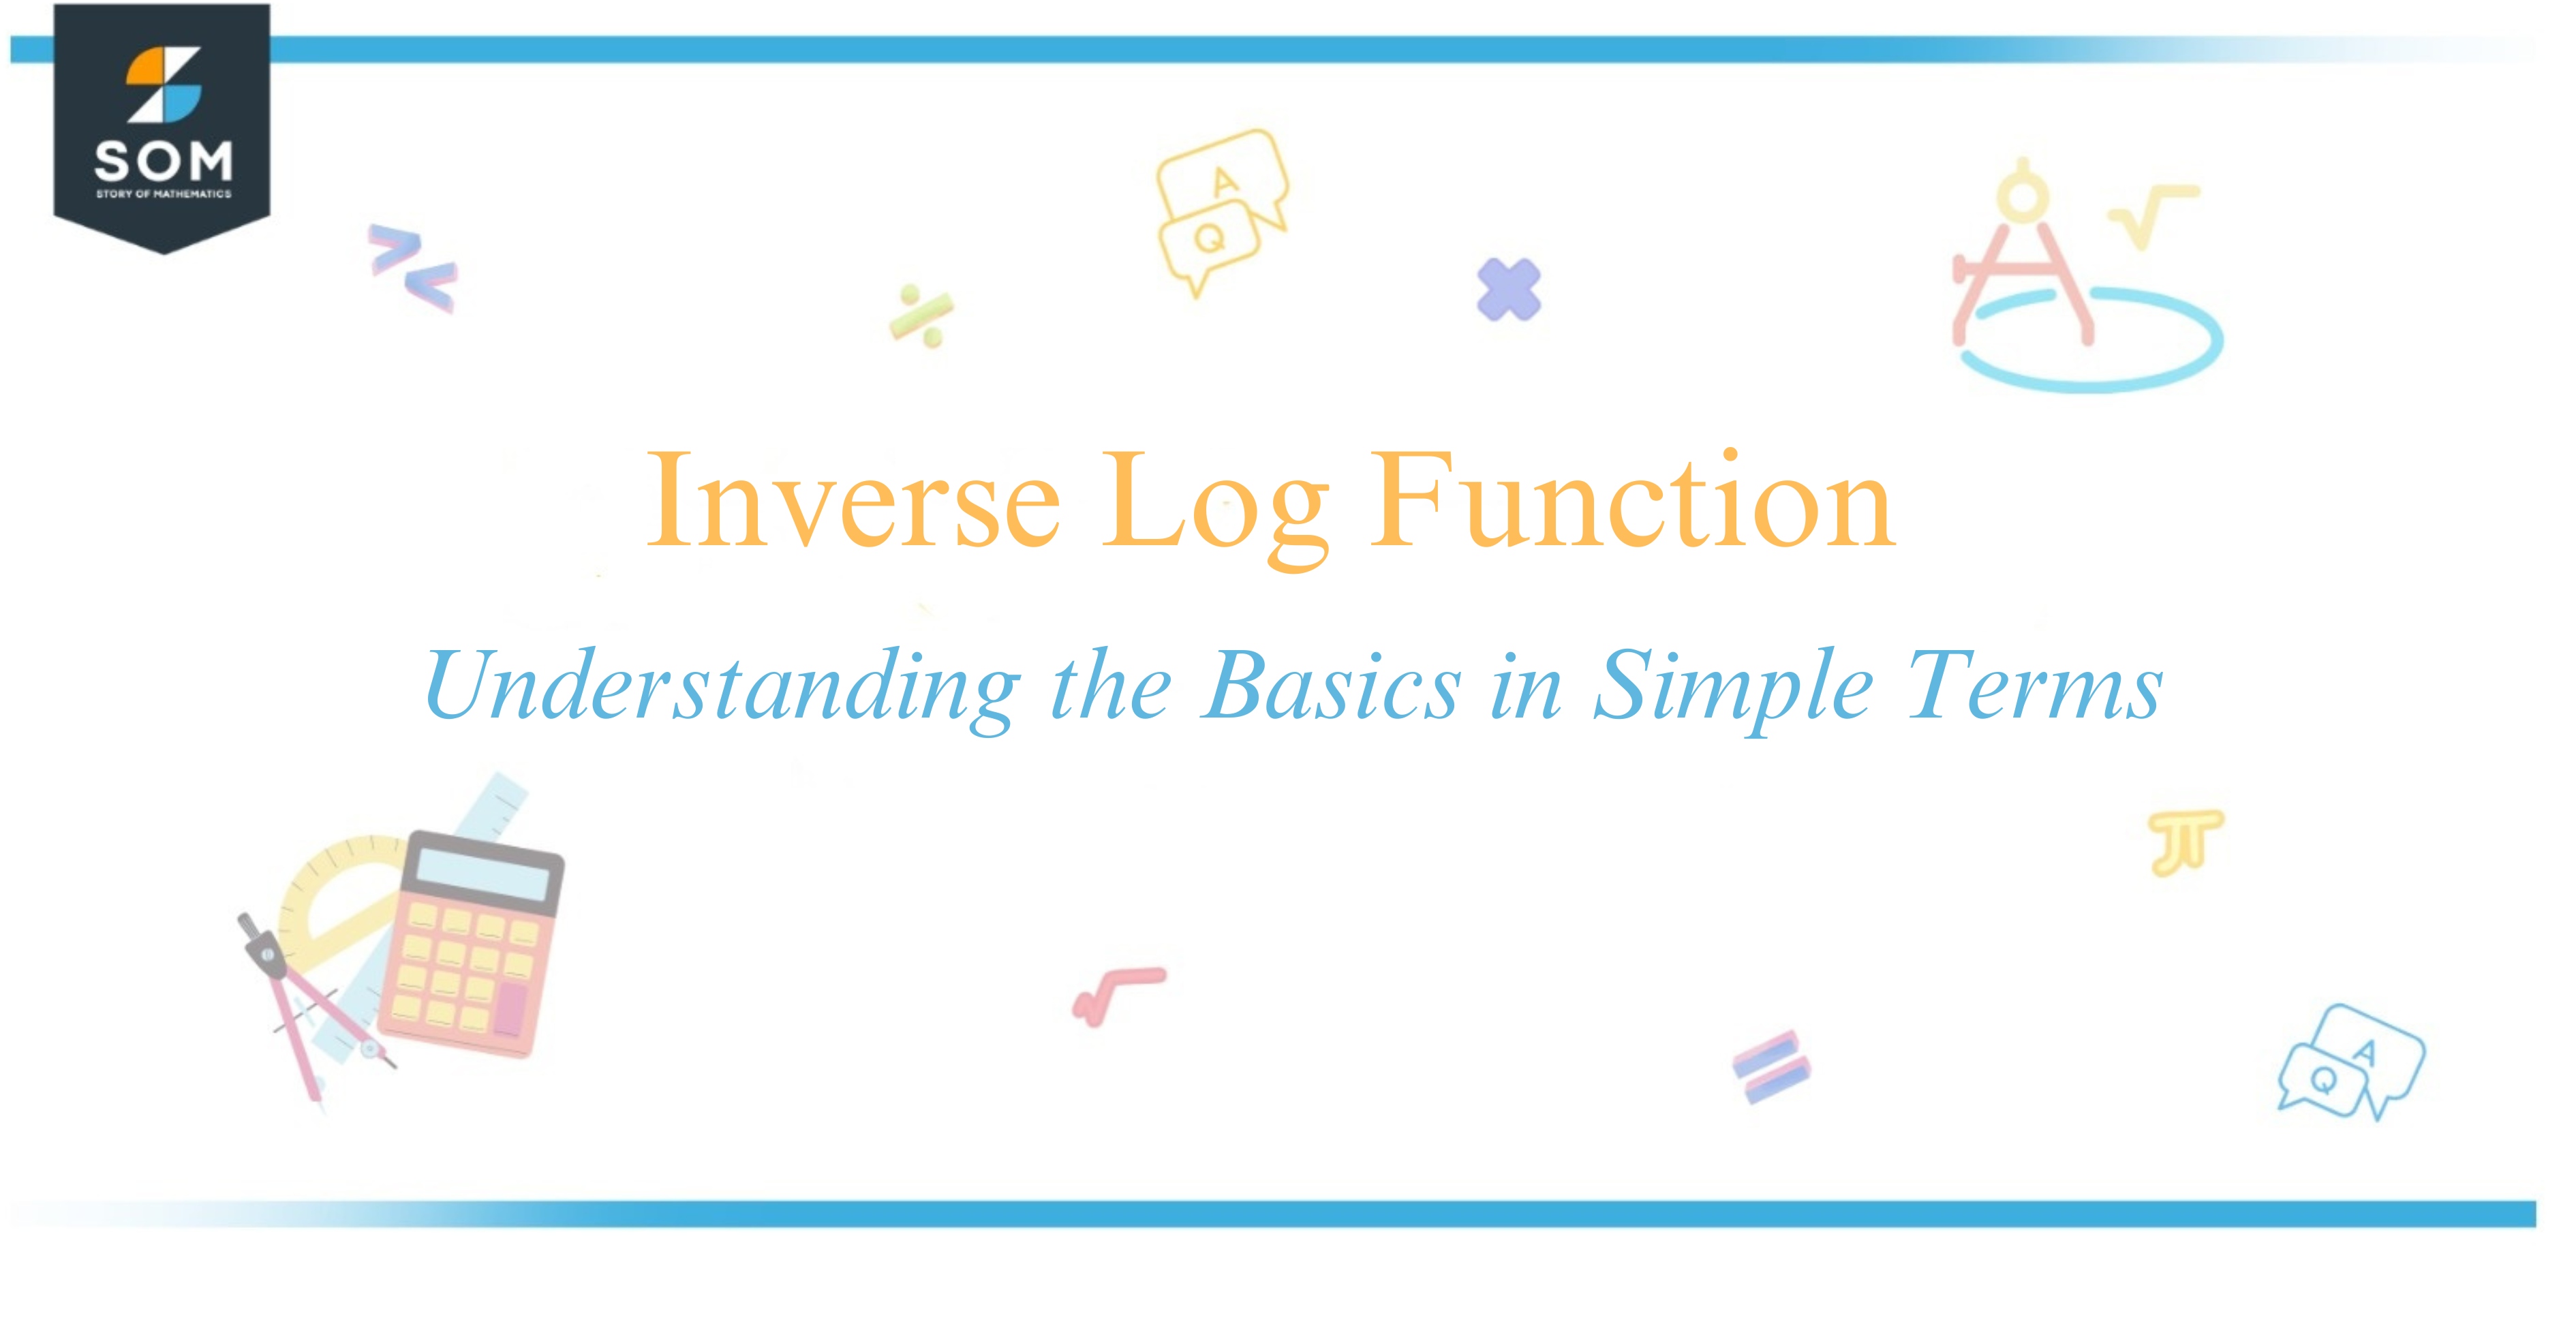 Inverse Log Function Understanding the Basics in Simple Terms